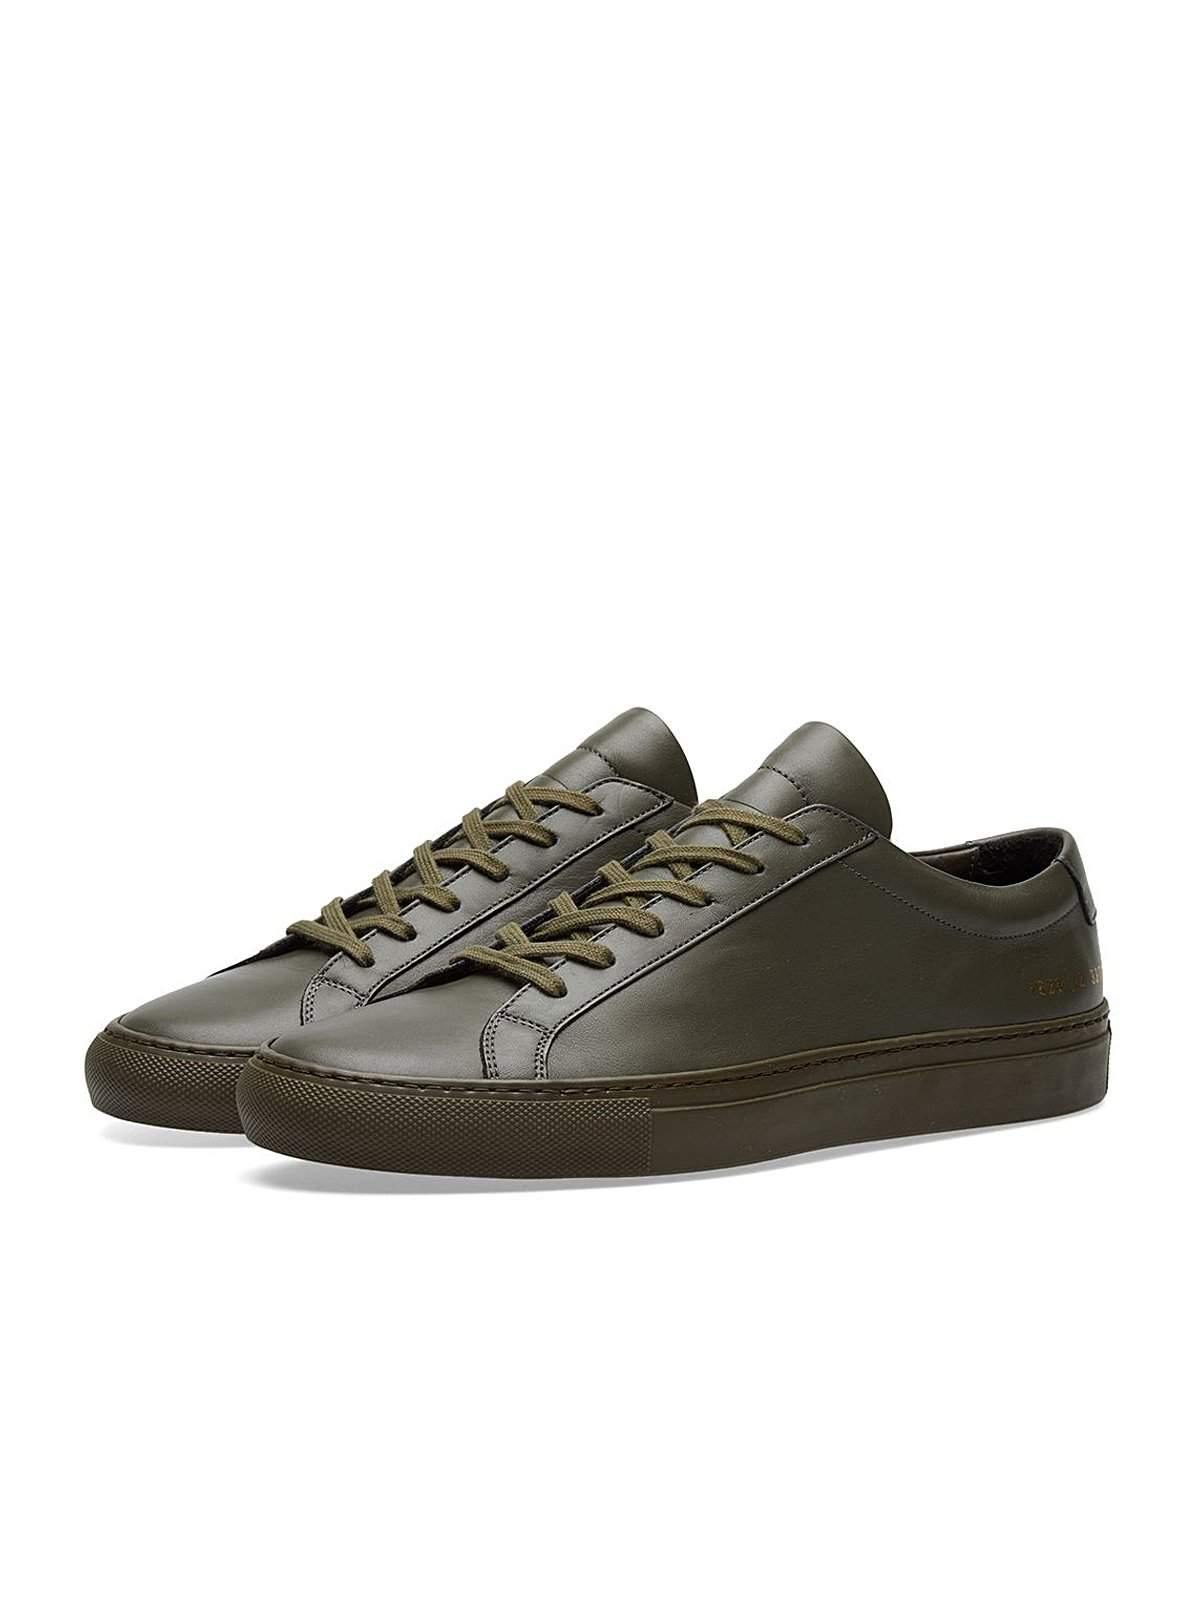 Common Projects Original Achilles Low Army Green - MORE by Morello Indonesia